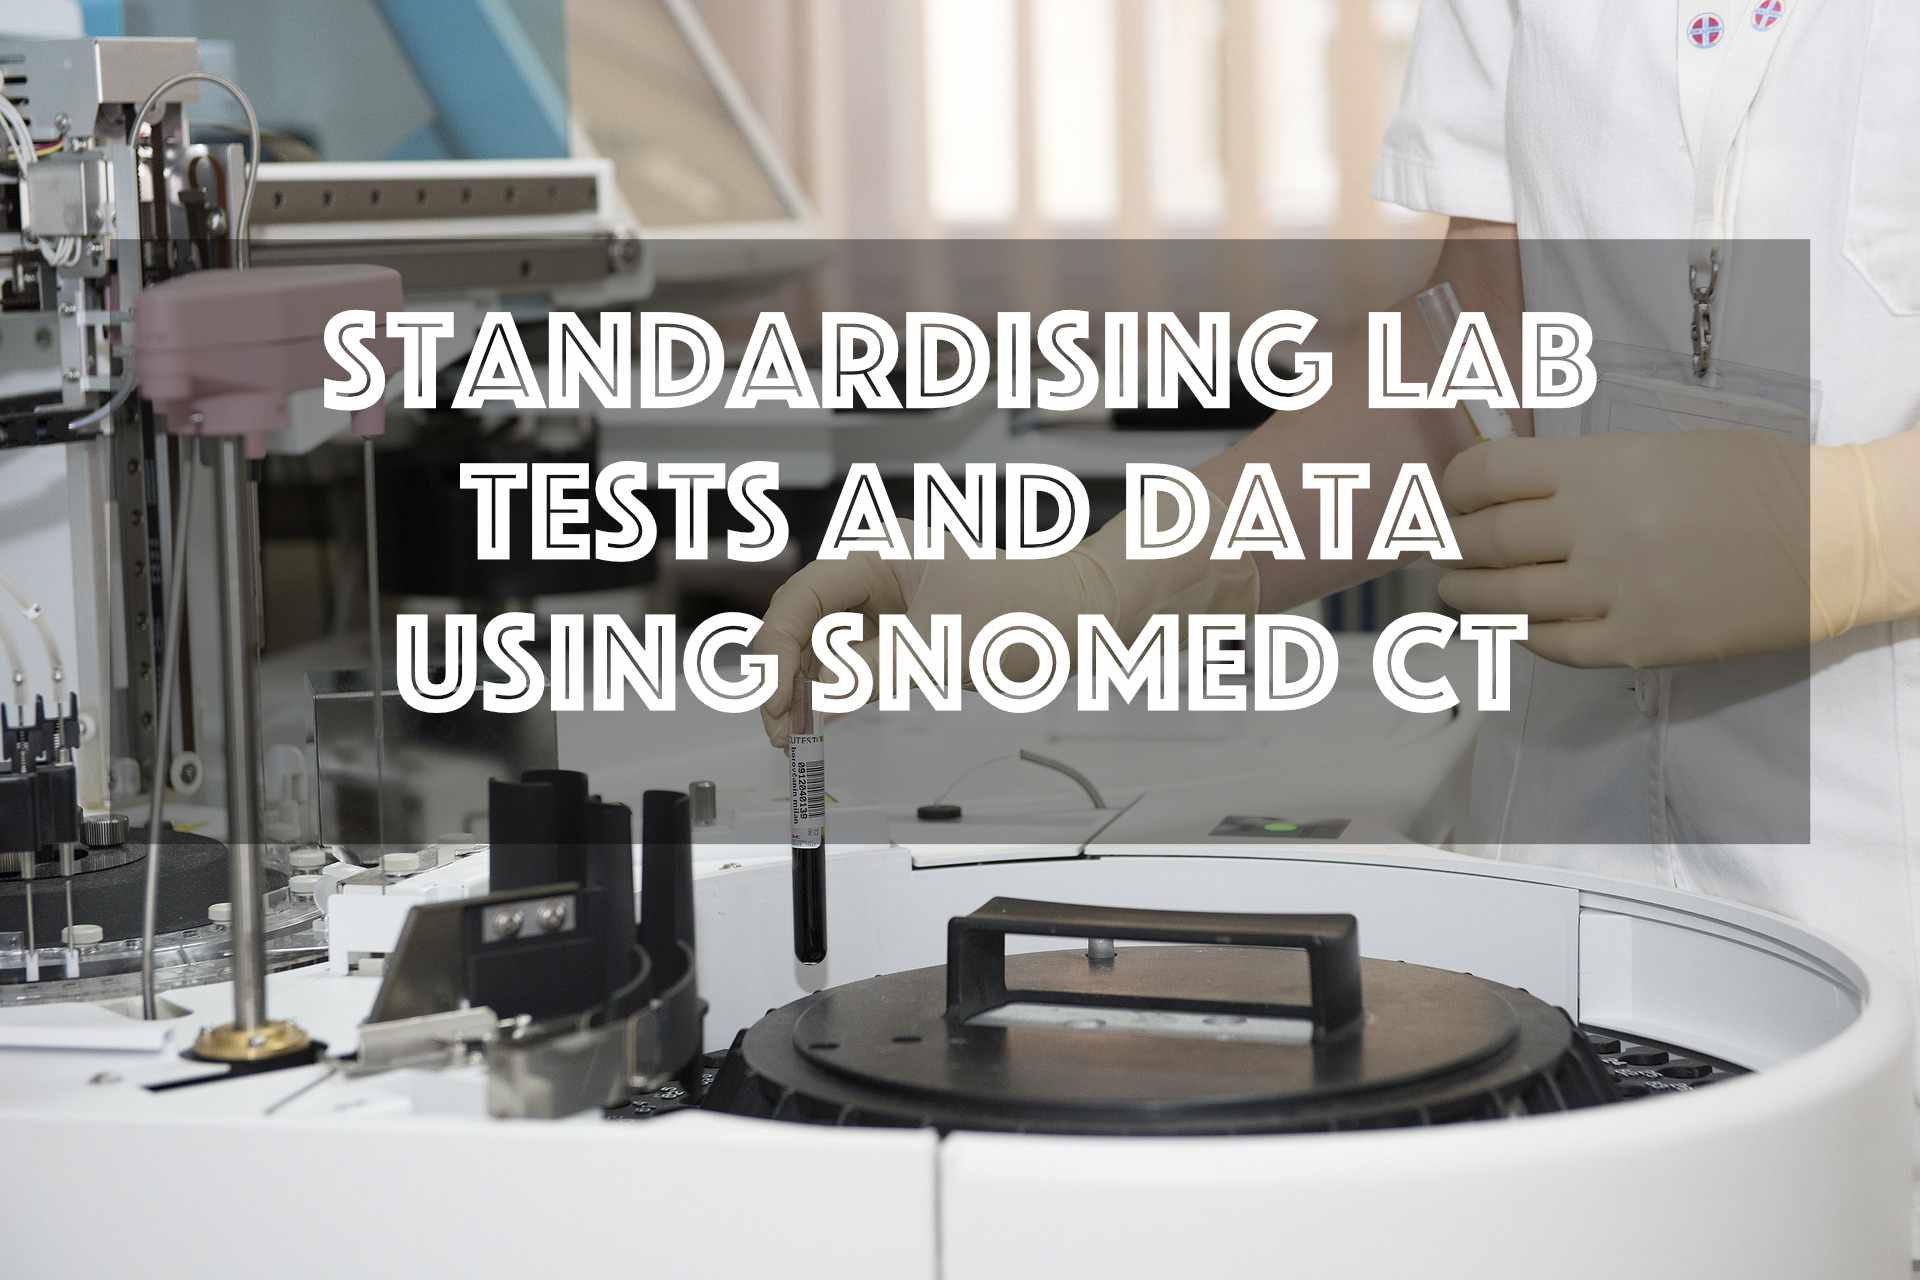 Standardising Lab Tests and Data using SNOMED CT